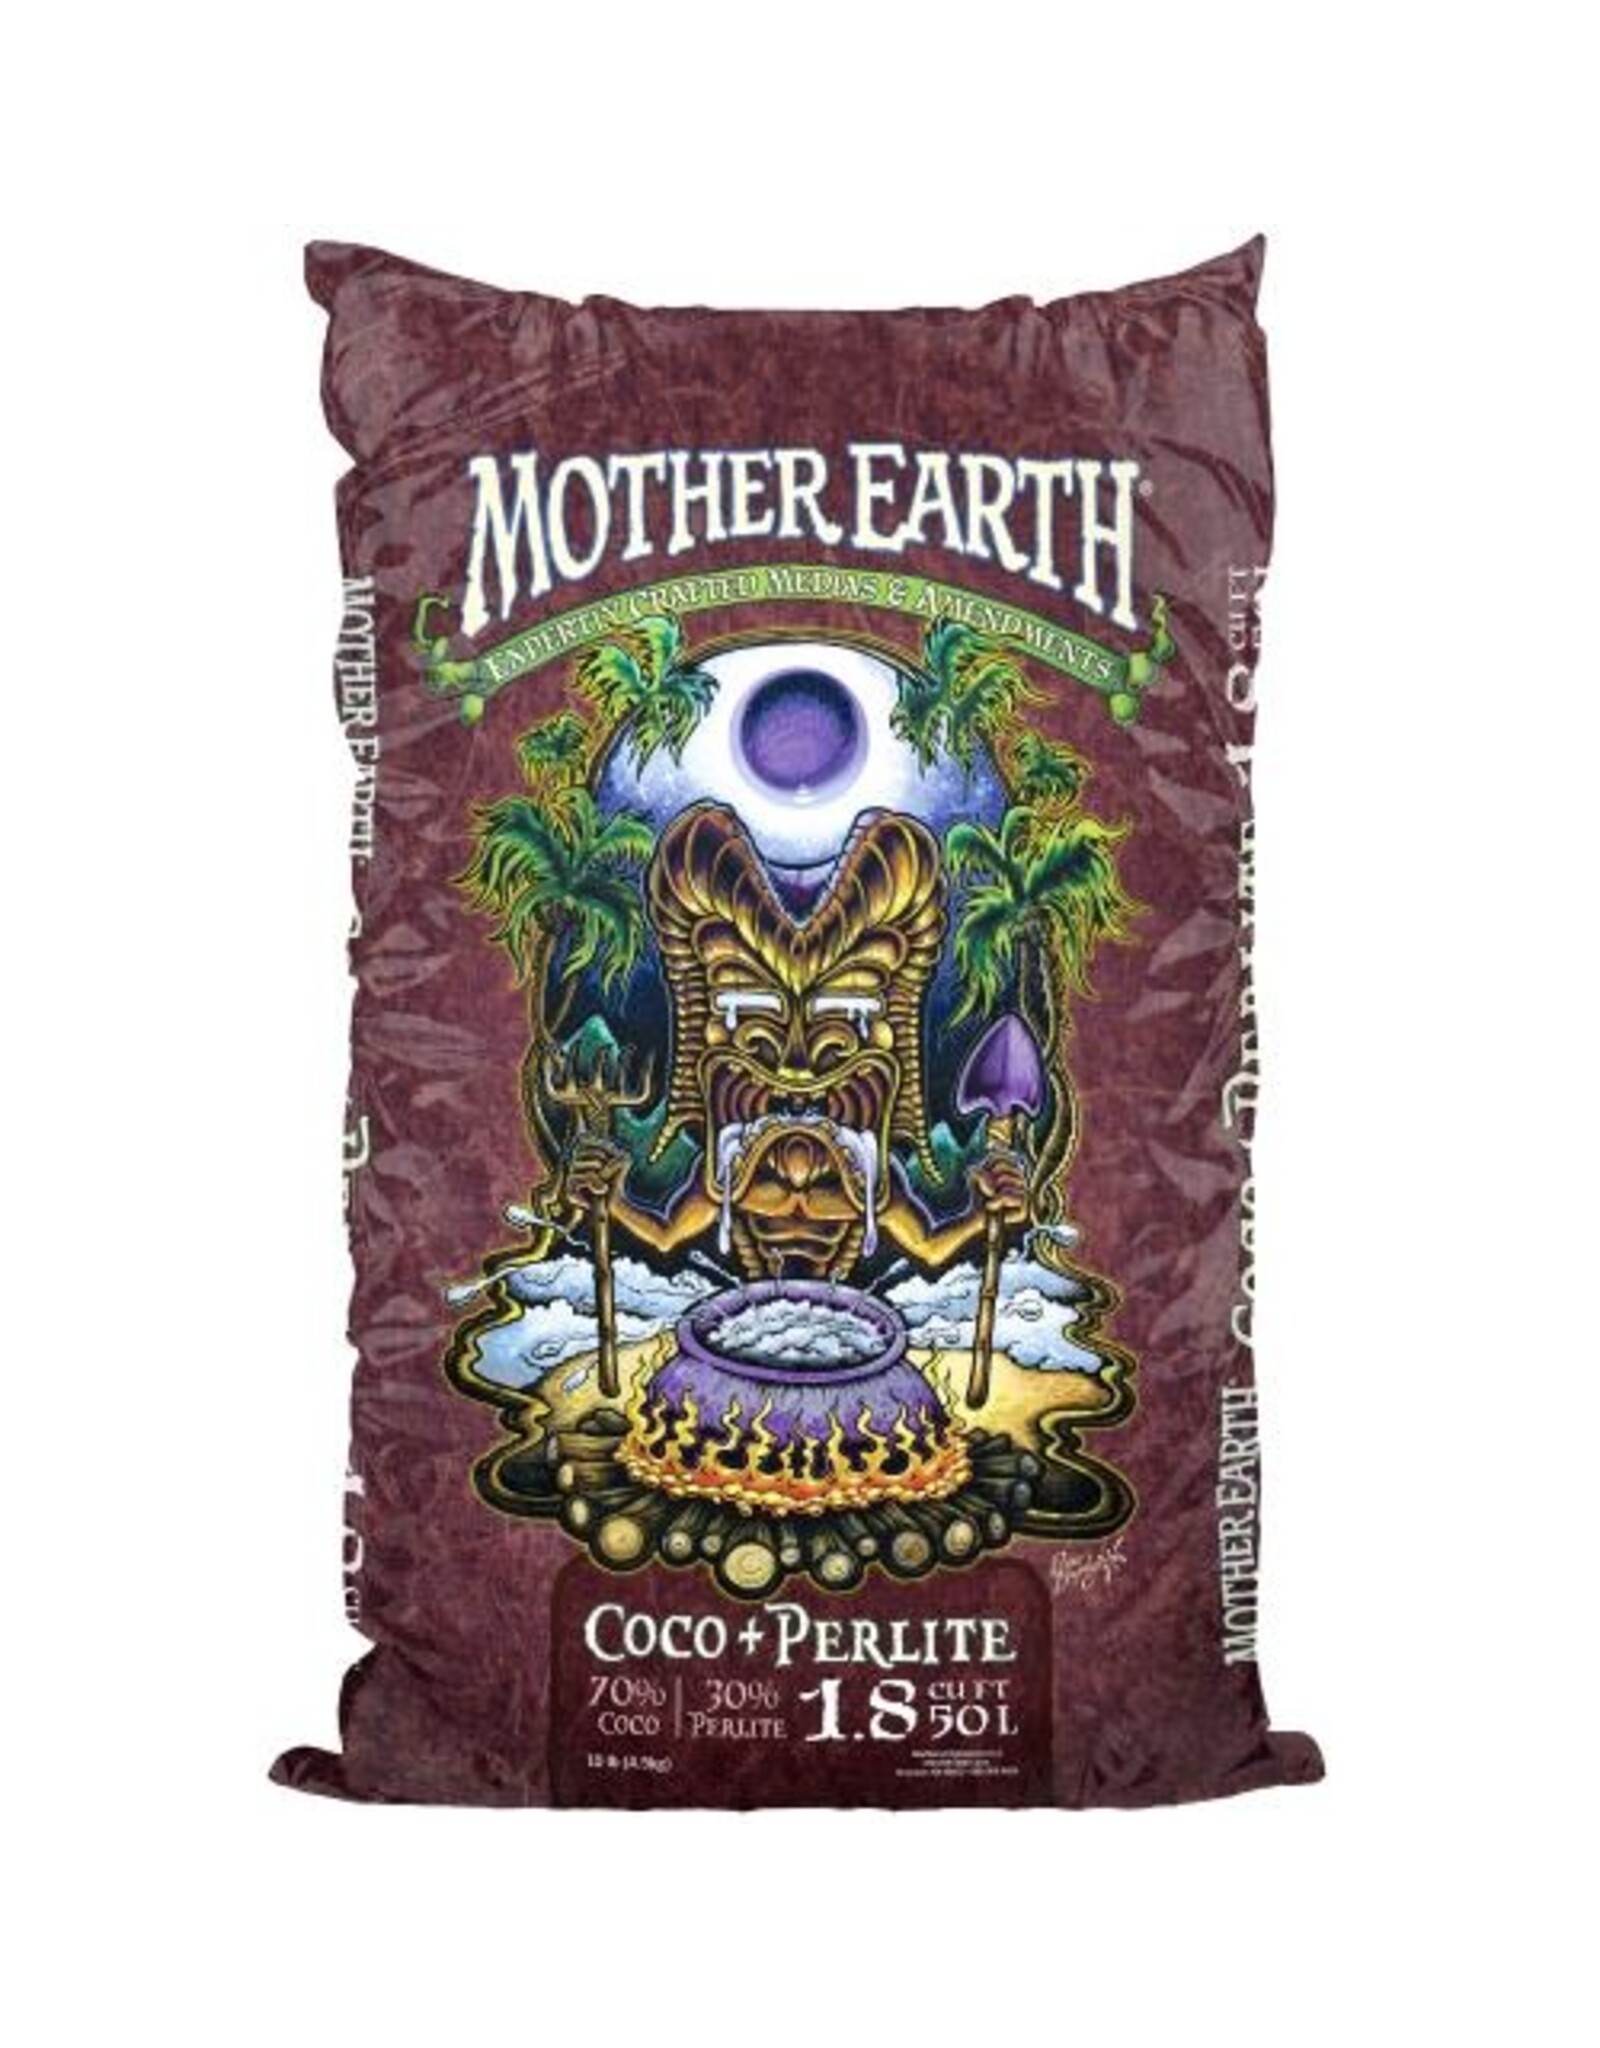 Mother Earth Mother Earth Coco + Perlite Mix 1.8 cuft